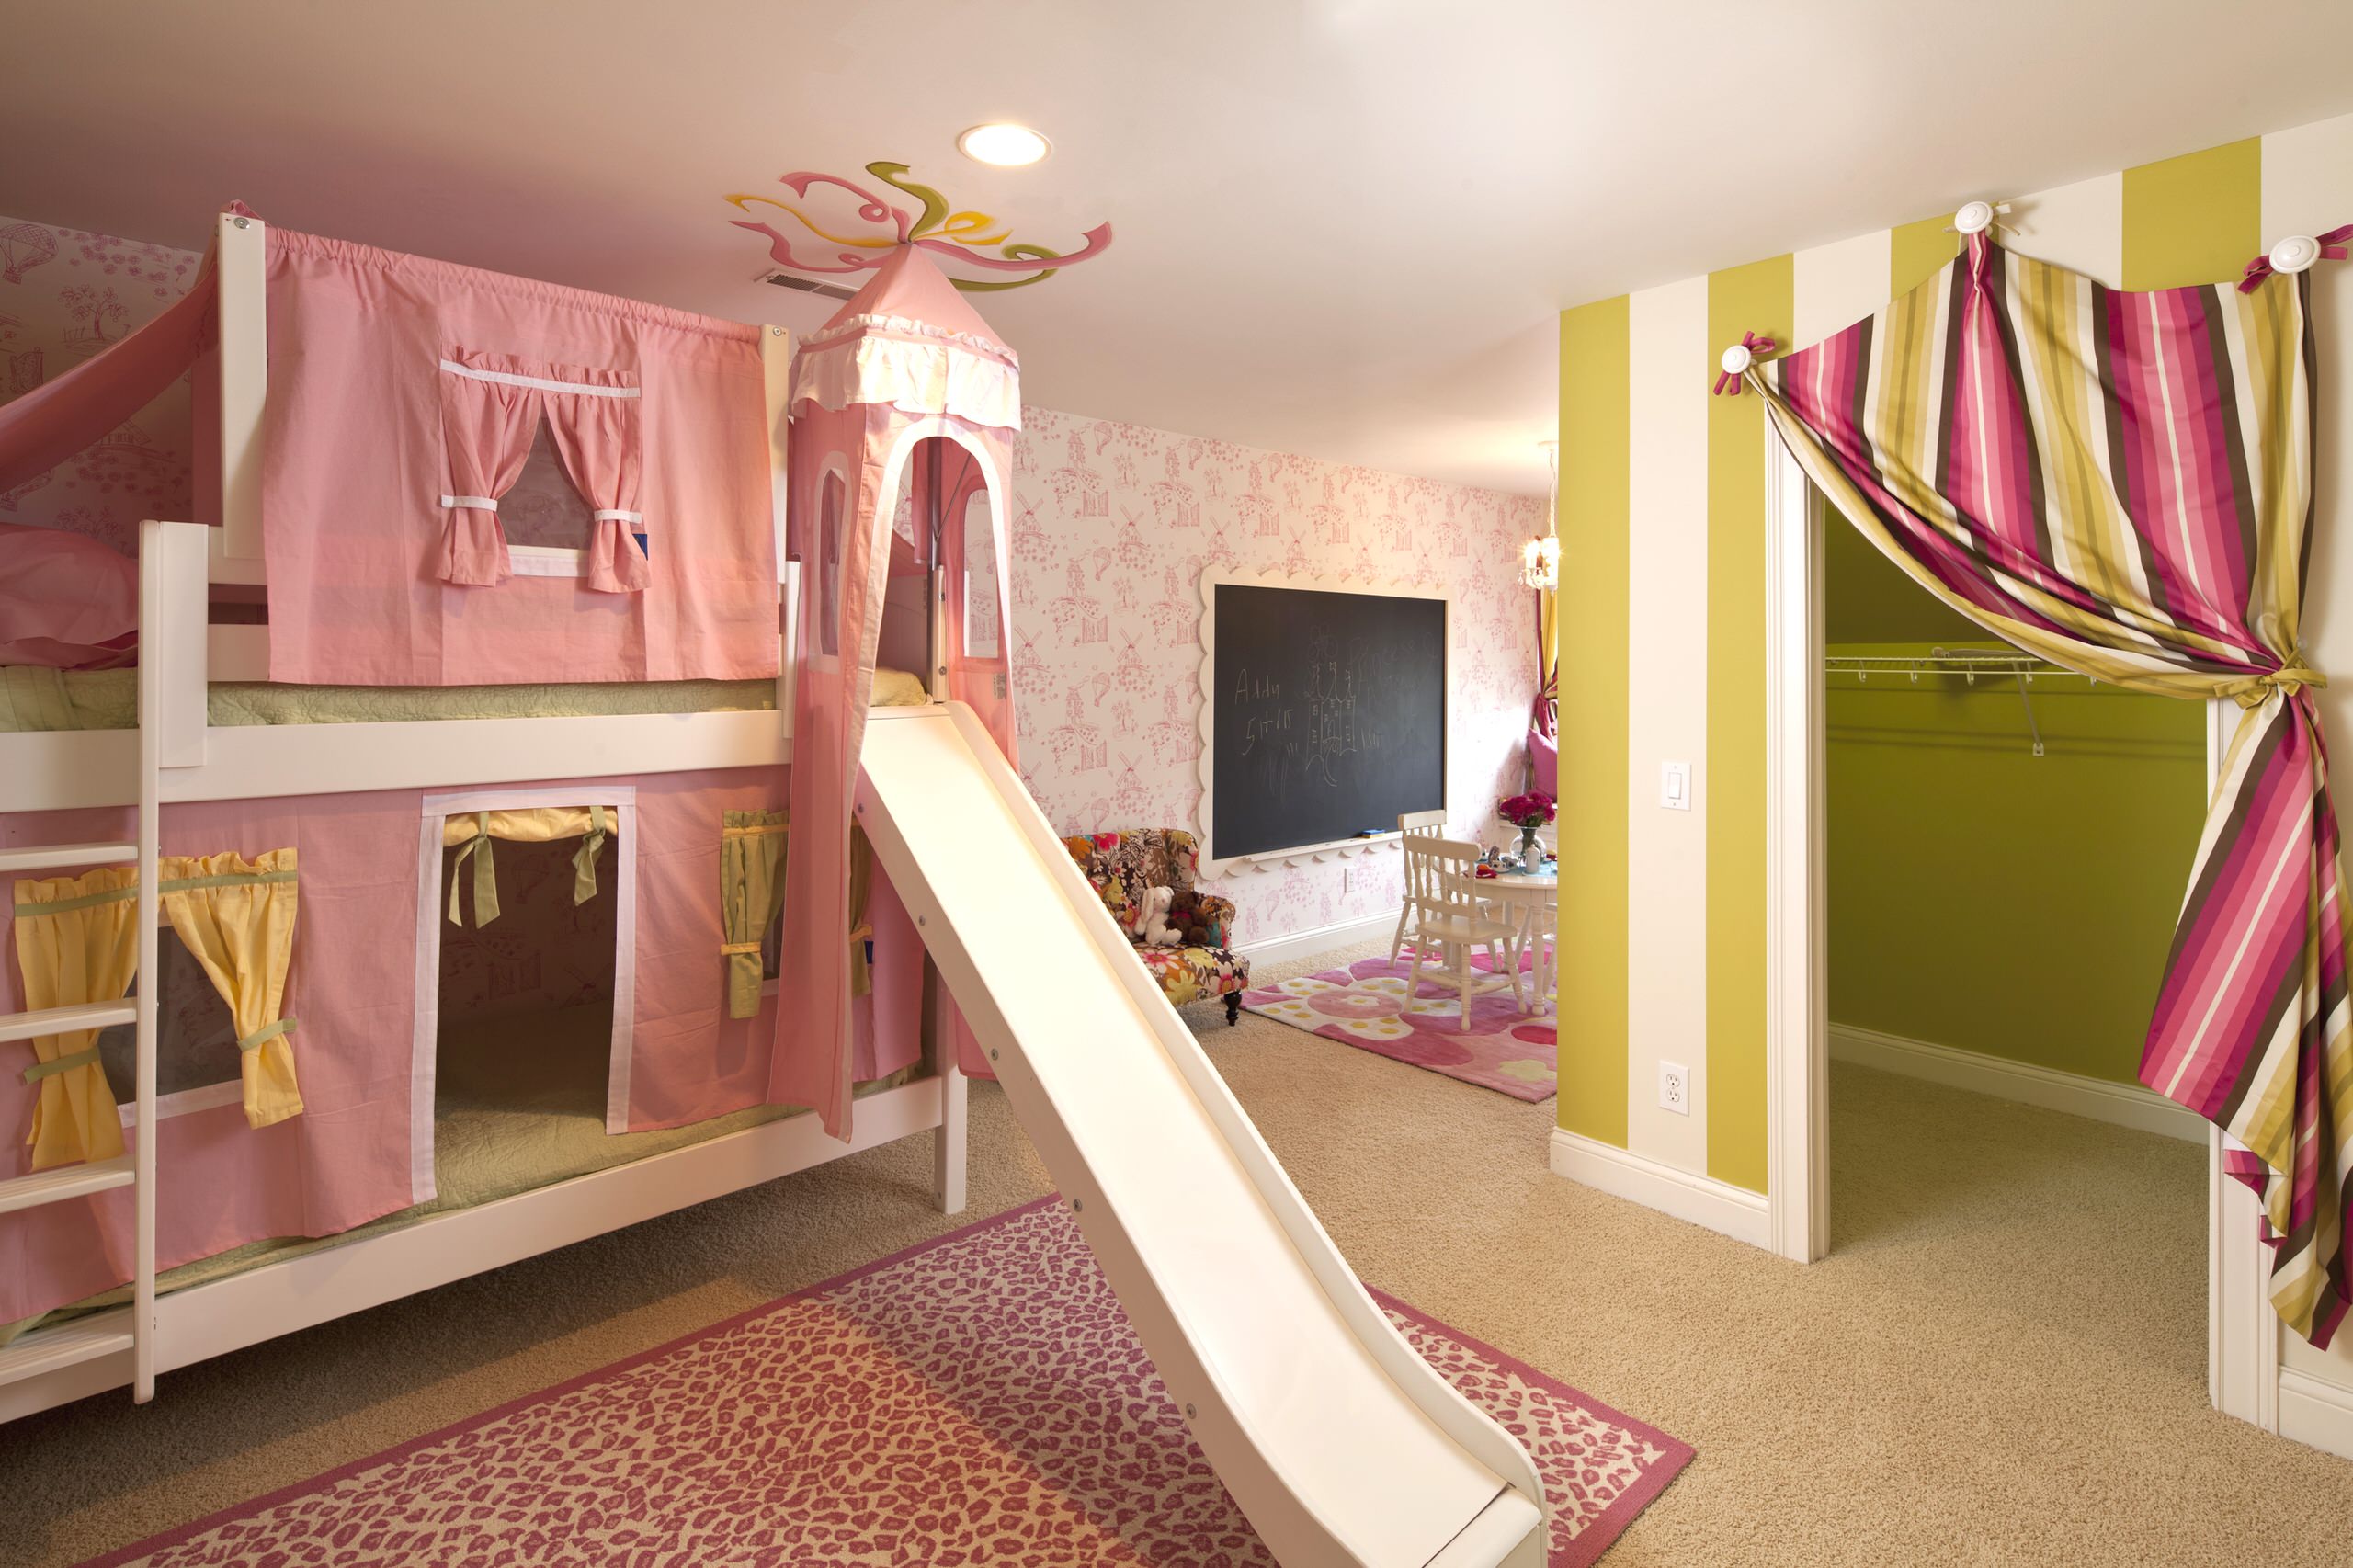 Castle Bunk Bed Play Space, Bunk Beds Houston